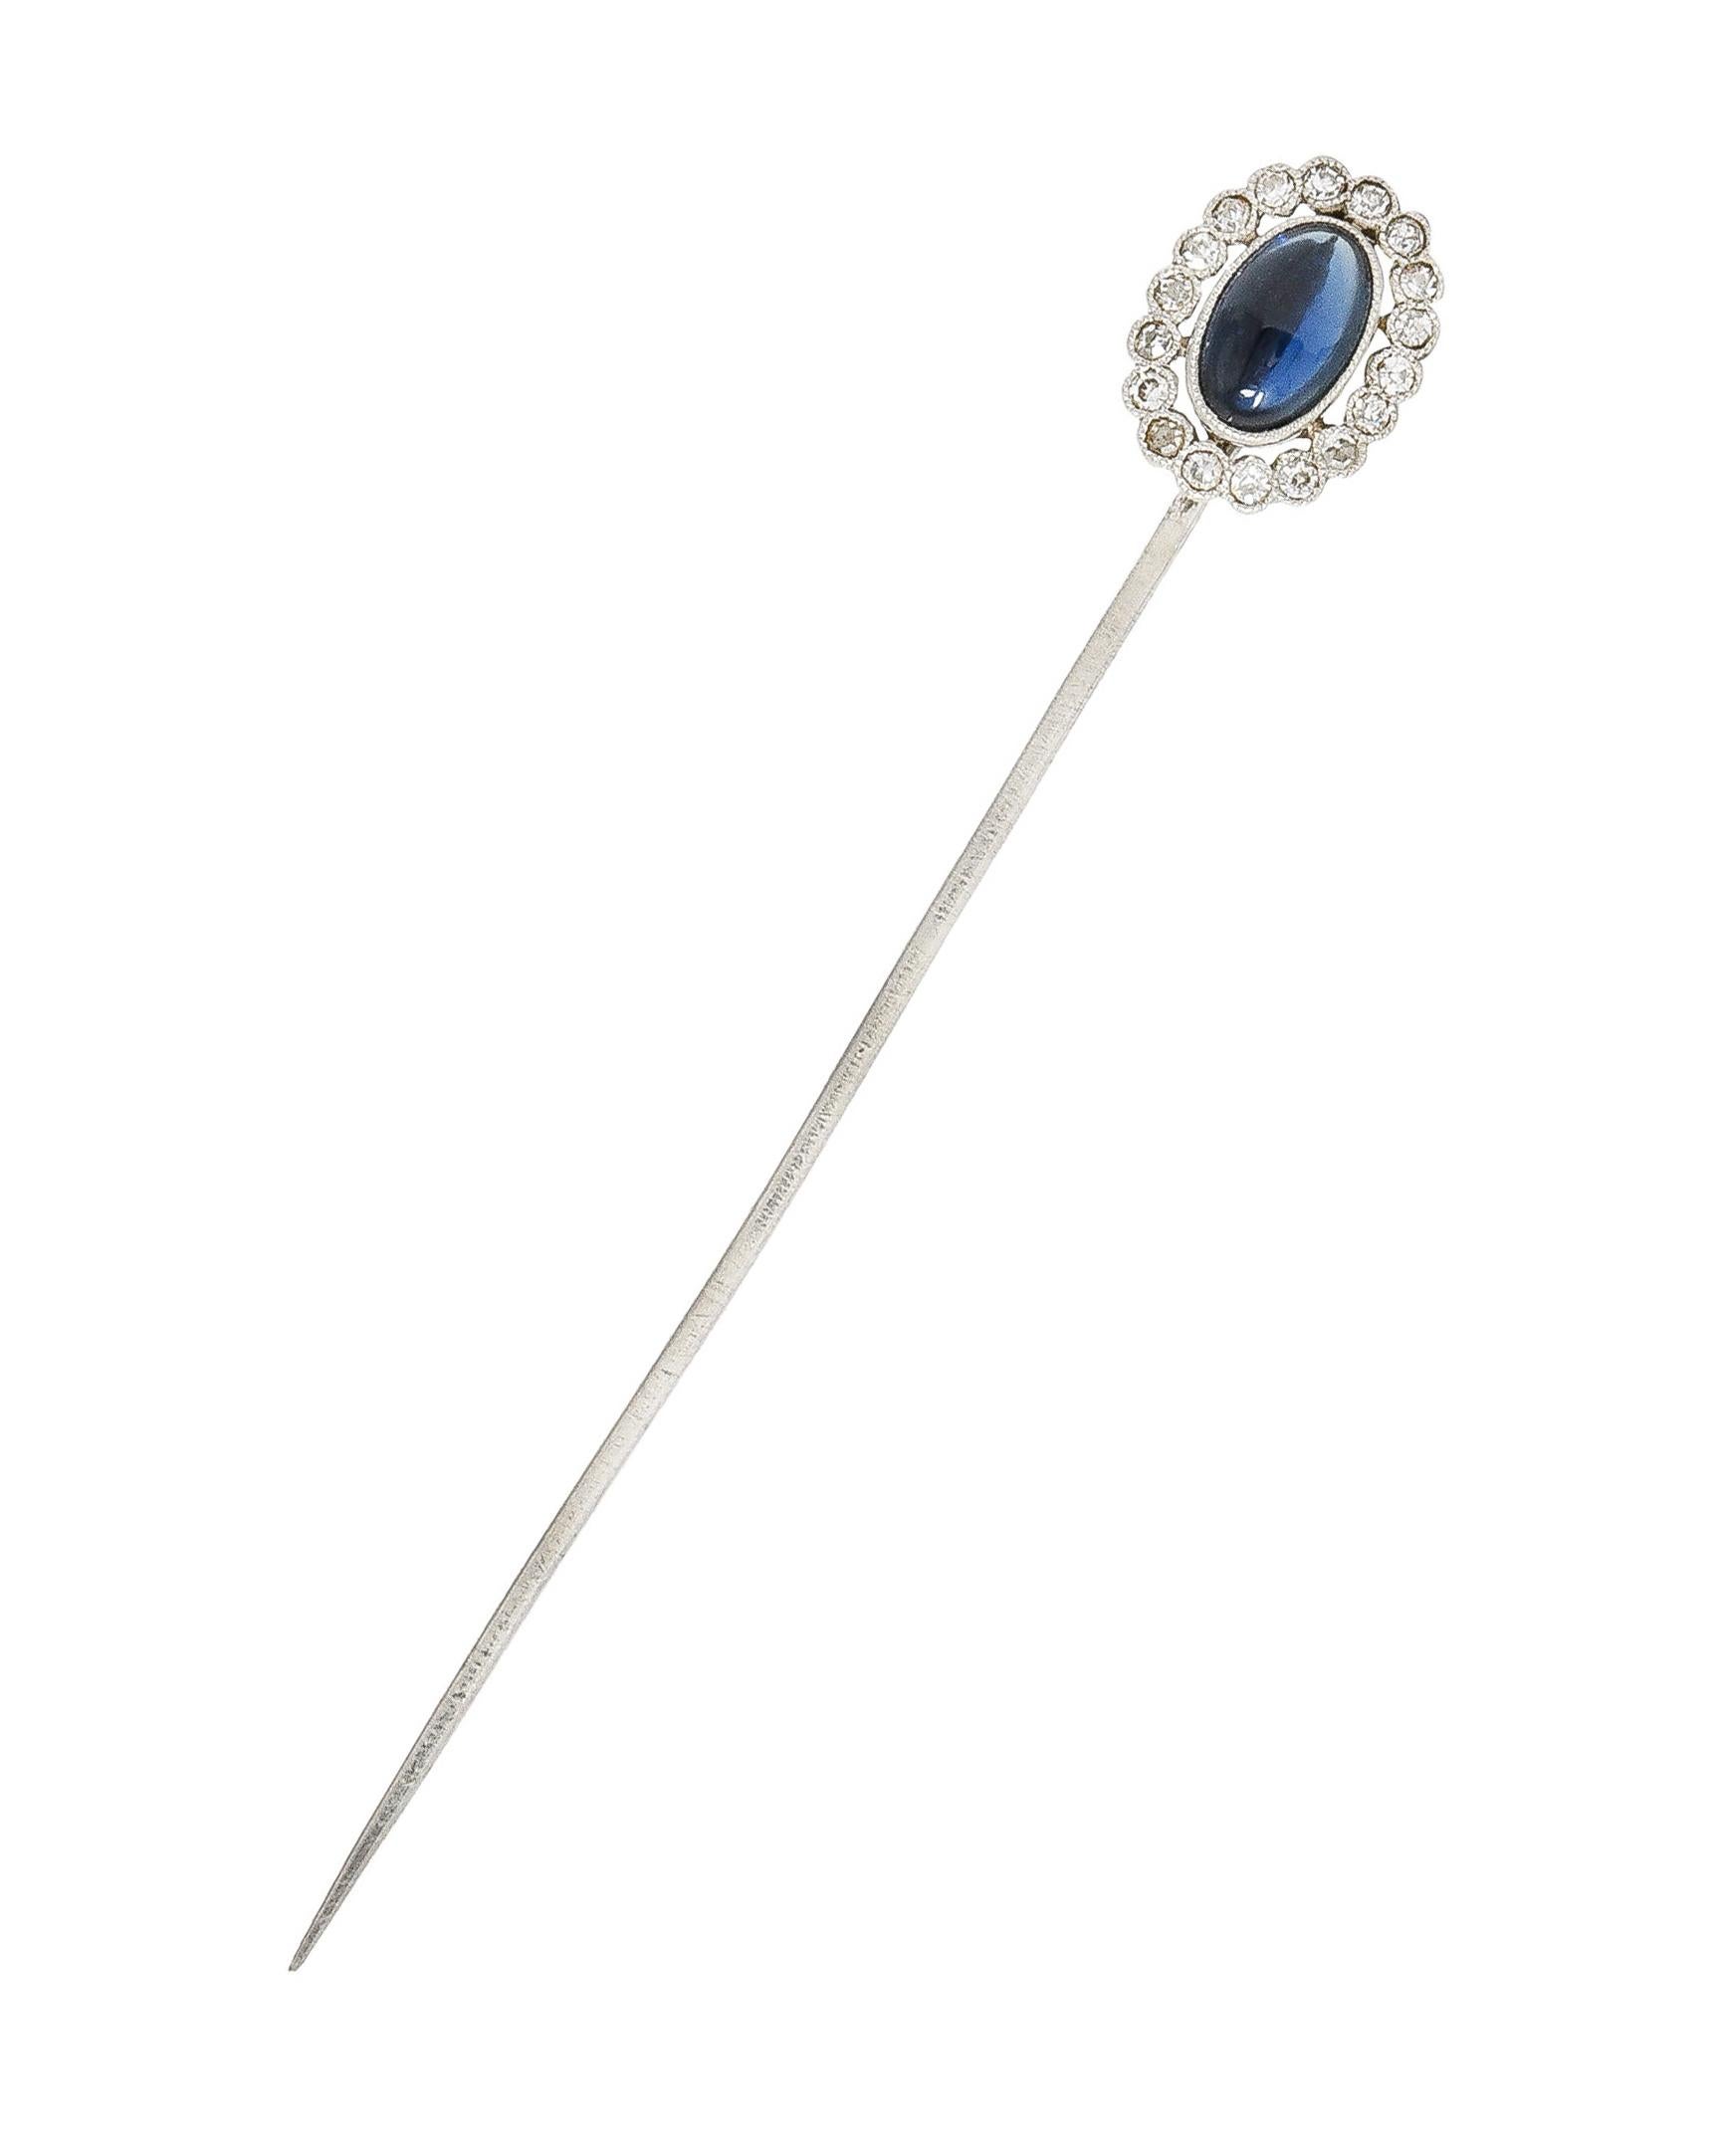 Centering an oval shaped sapphire cabochon weighing approximately 1.29 carats total. Transparent medium to dark blue in color - bezel set with a pierced halo surround. Comprised of old mine cut diamonds weighing approximately 0.36 carat total. Eye